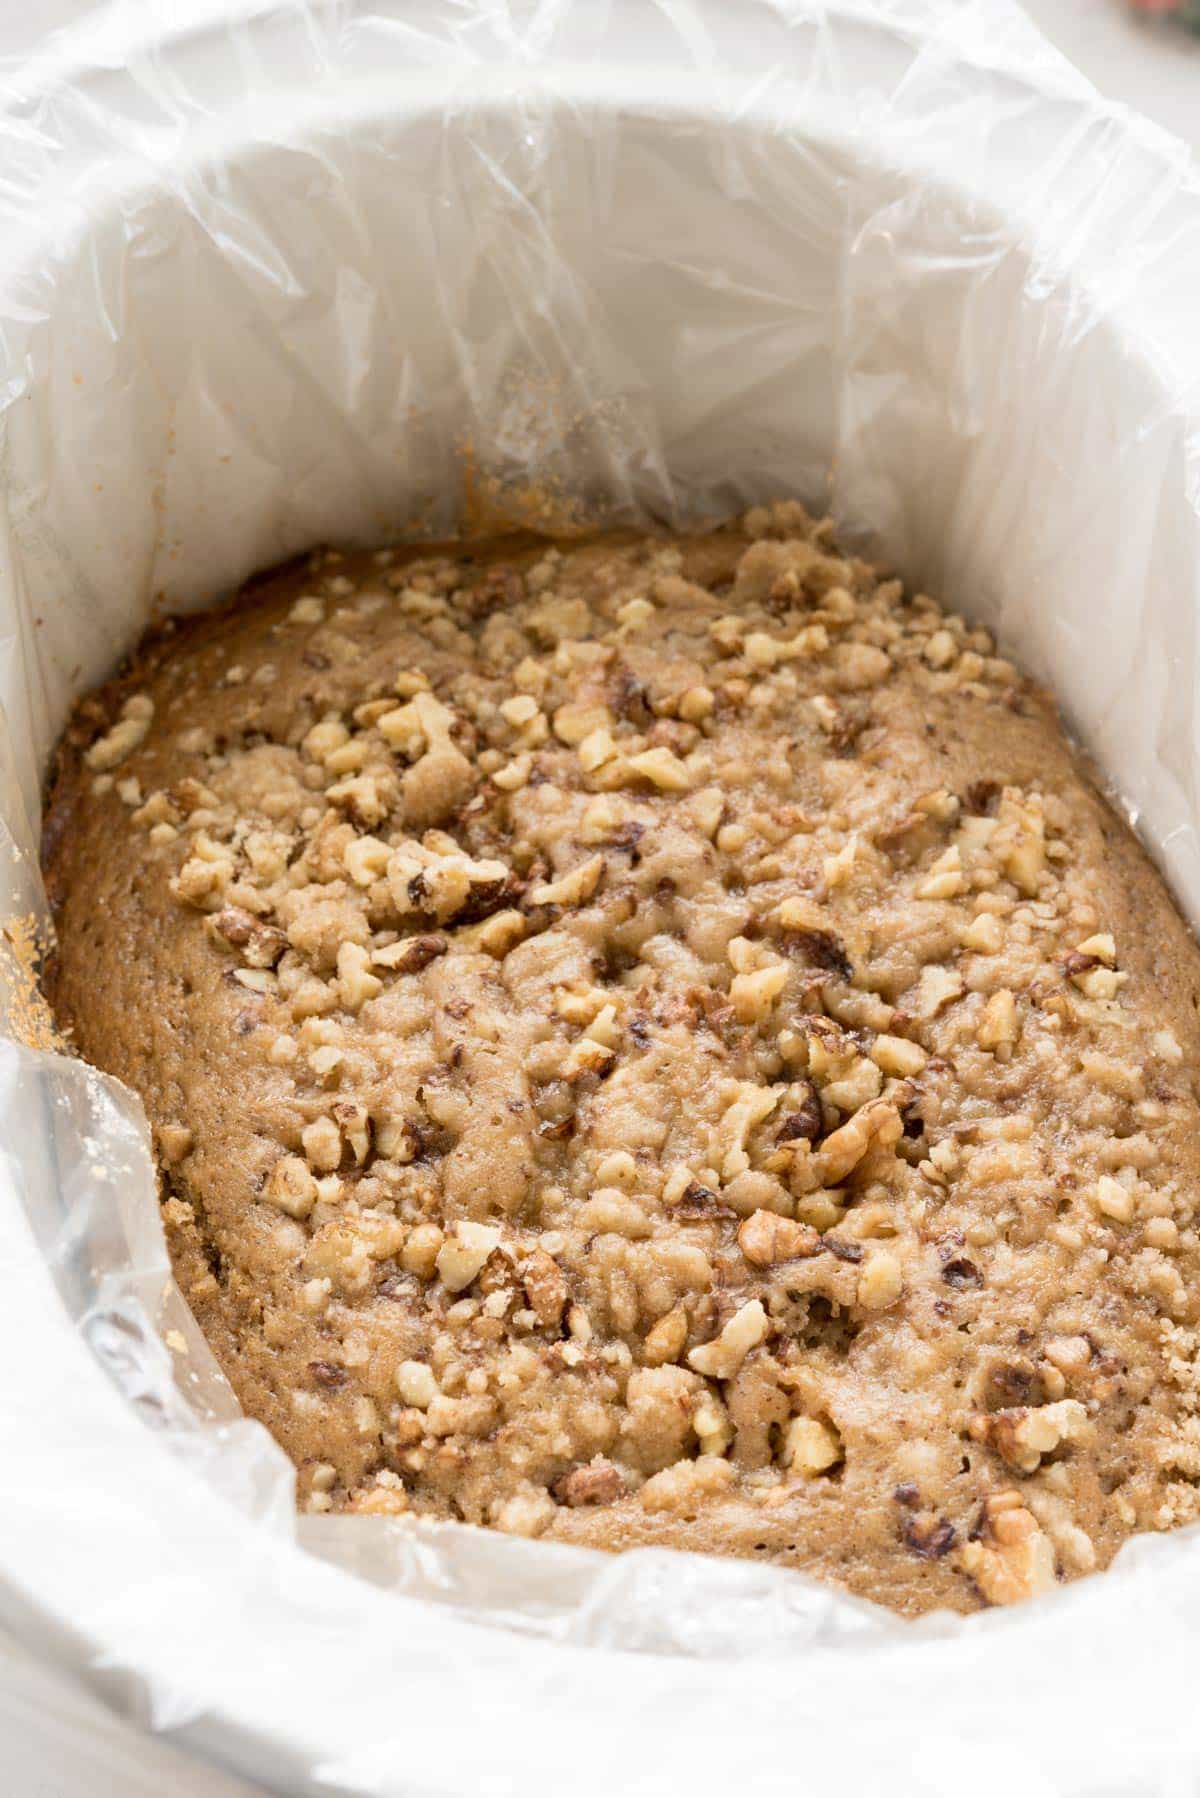 Slow Cooker Coffee Cake - an easy coffee cake recipe made in a crockpot.